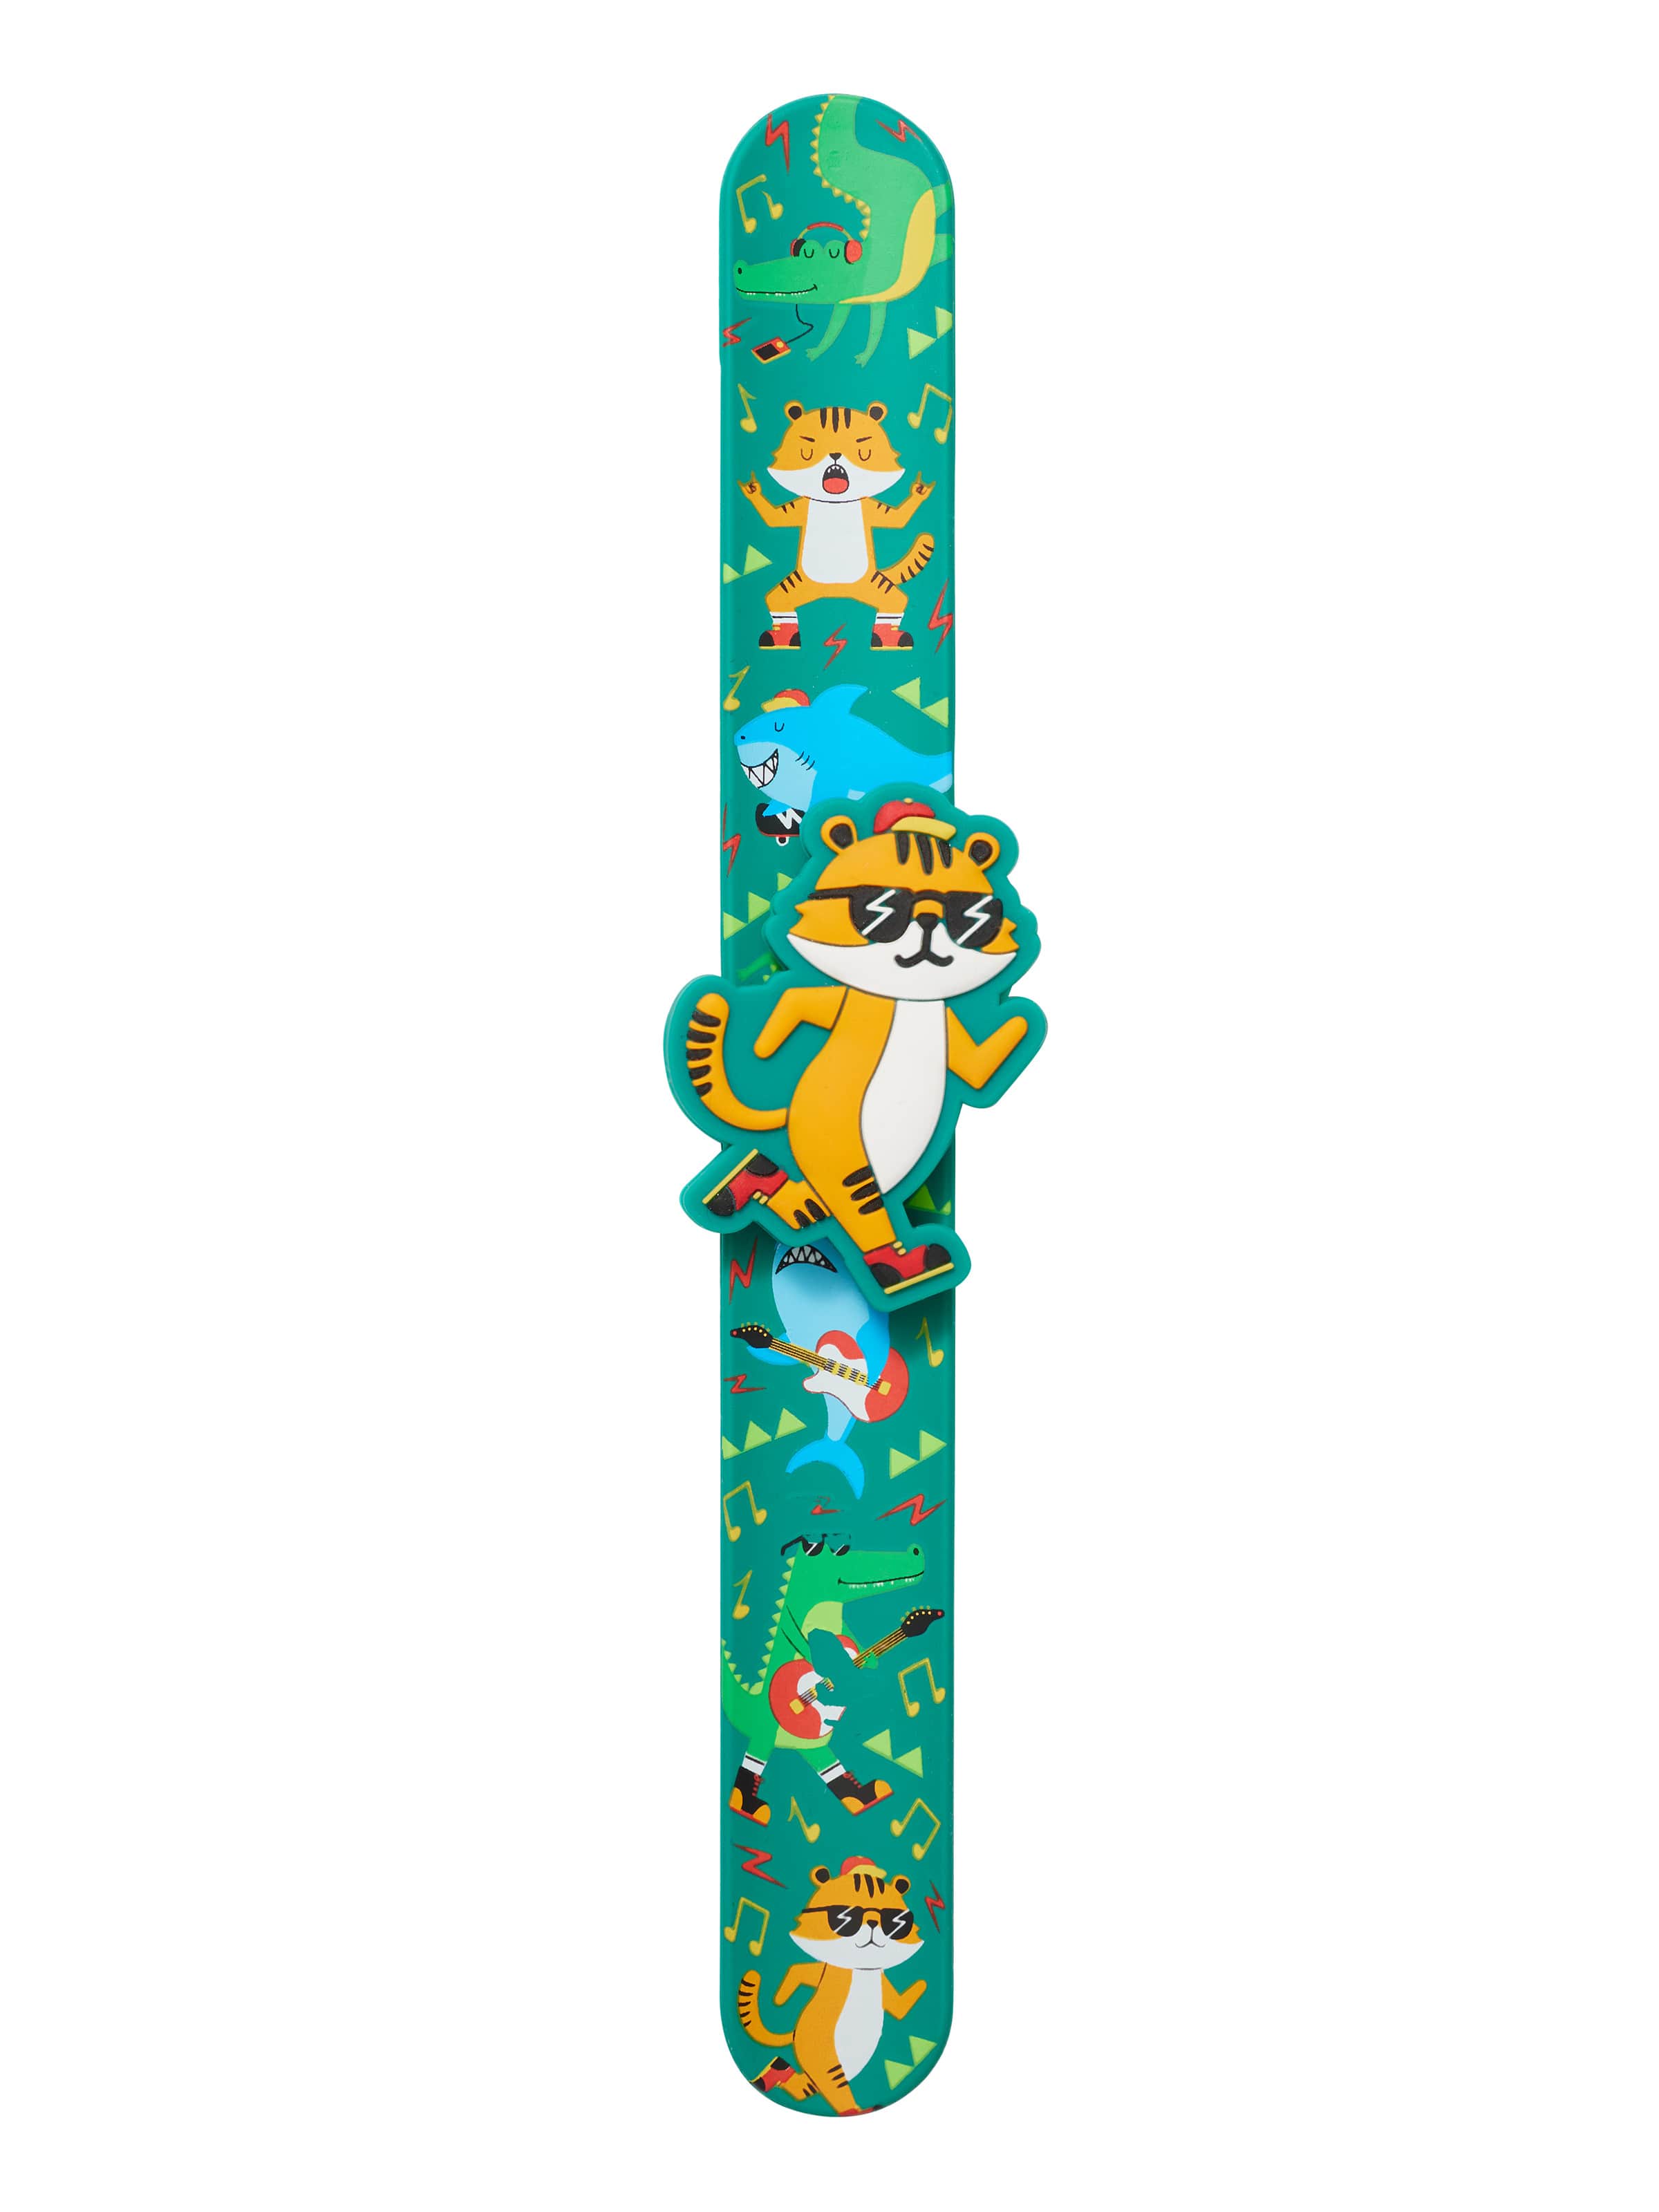 https://smiggle.jgl.co.nz/SM/aurora/images/products/tiny/415018_green_t.jpg